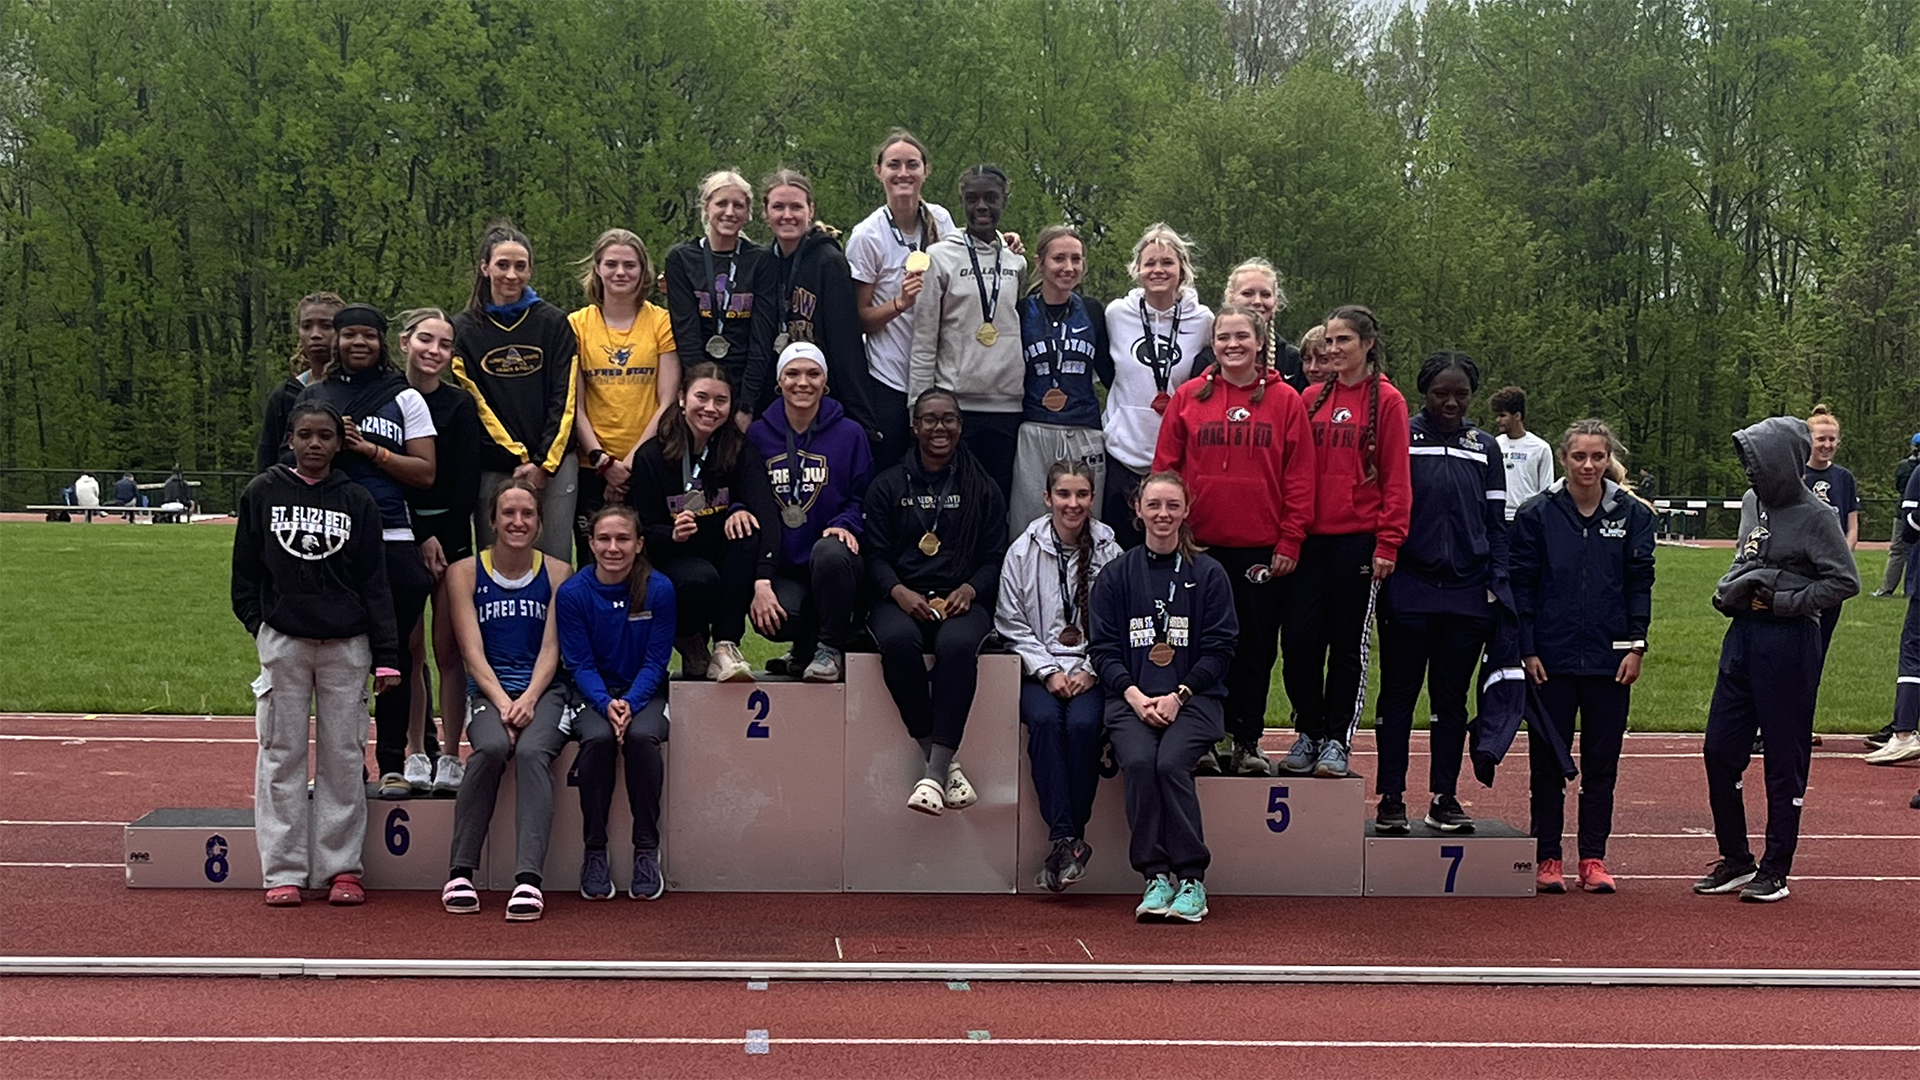 The 4x100 relay team placed second at the championship. Photo courtesy of Penn State Behrend Sports Information.